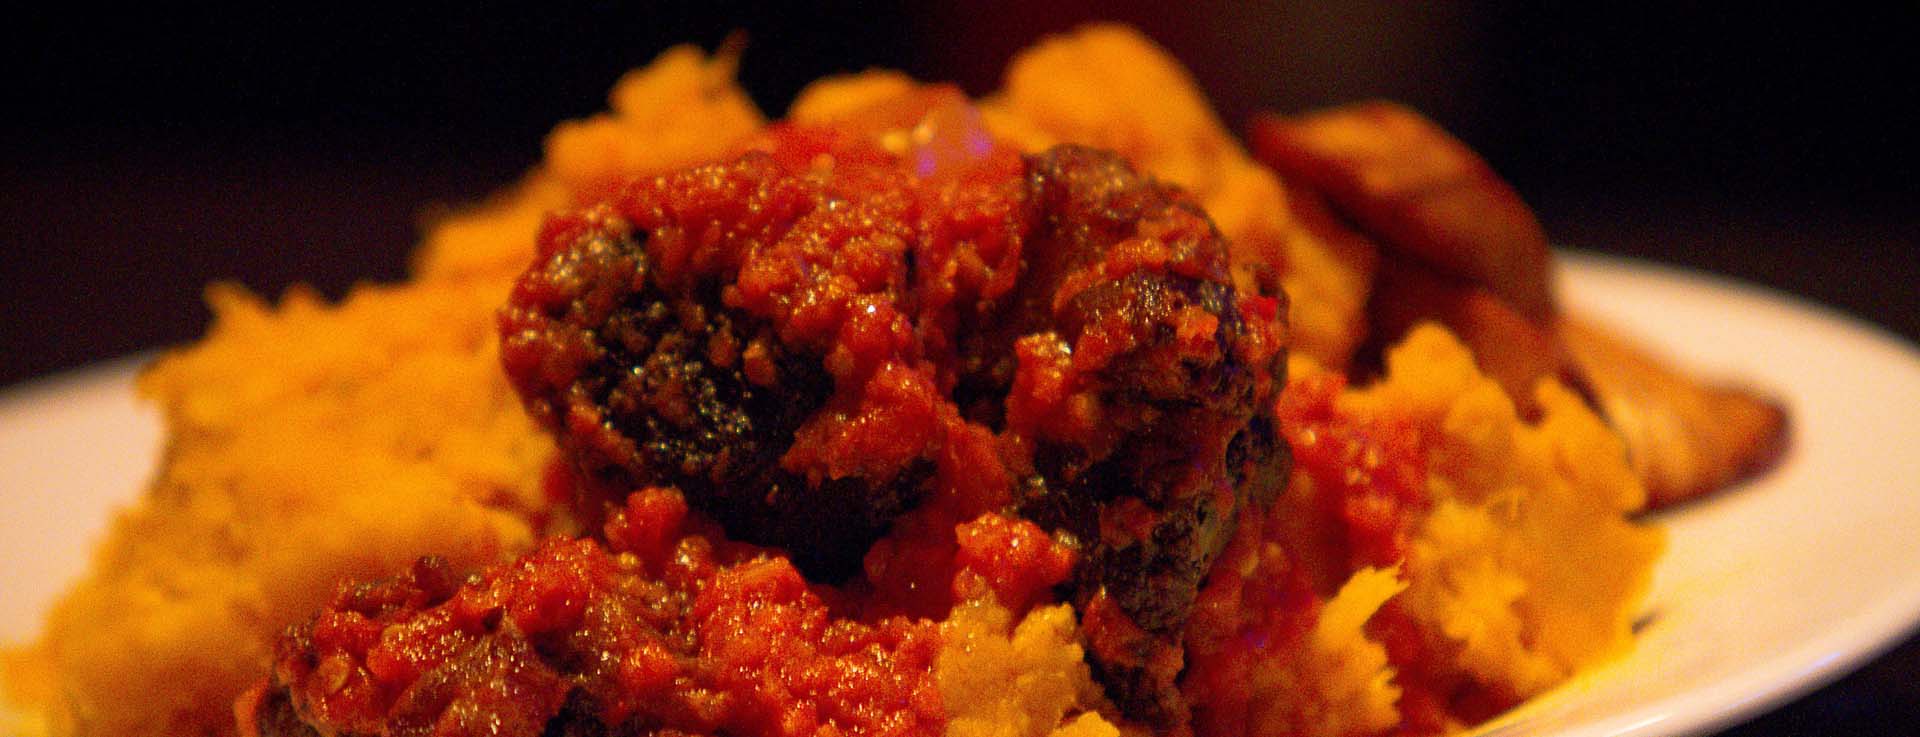 K's Spice African Restaurant Yam pottage image for home page